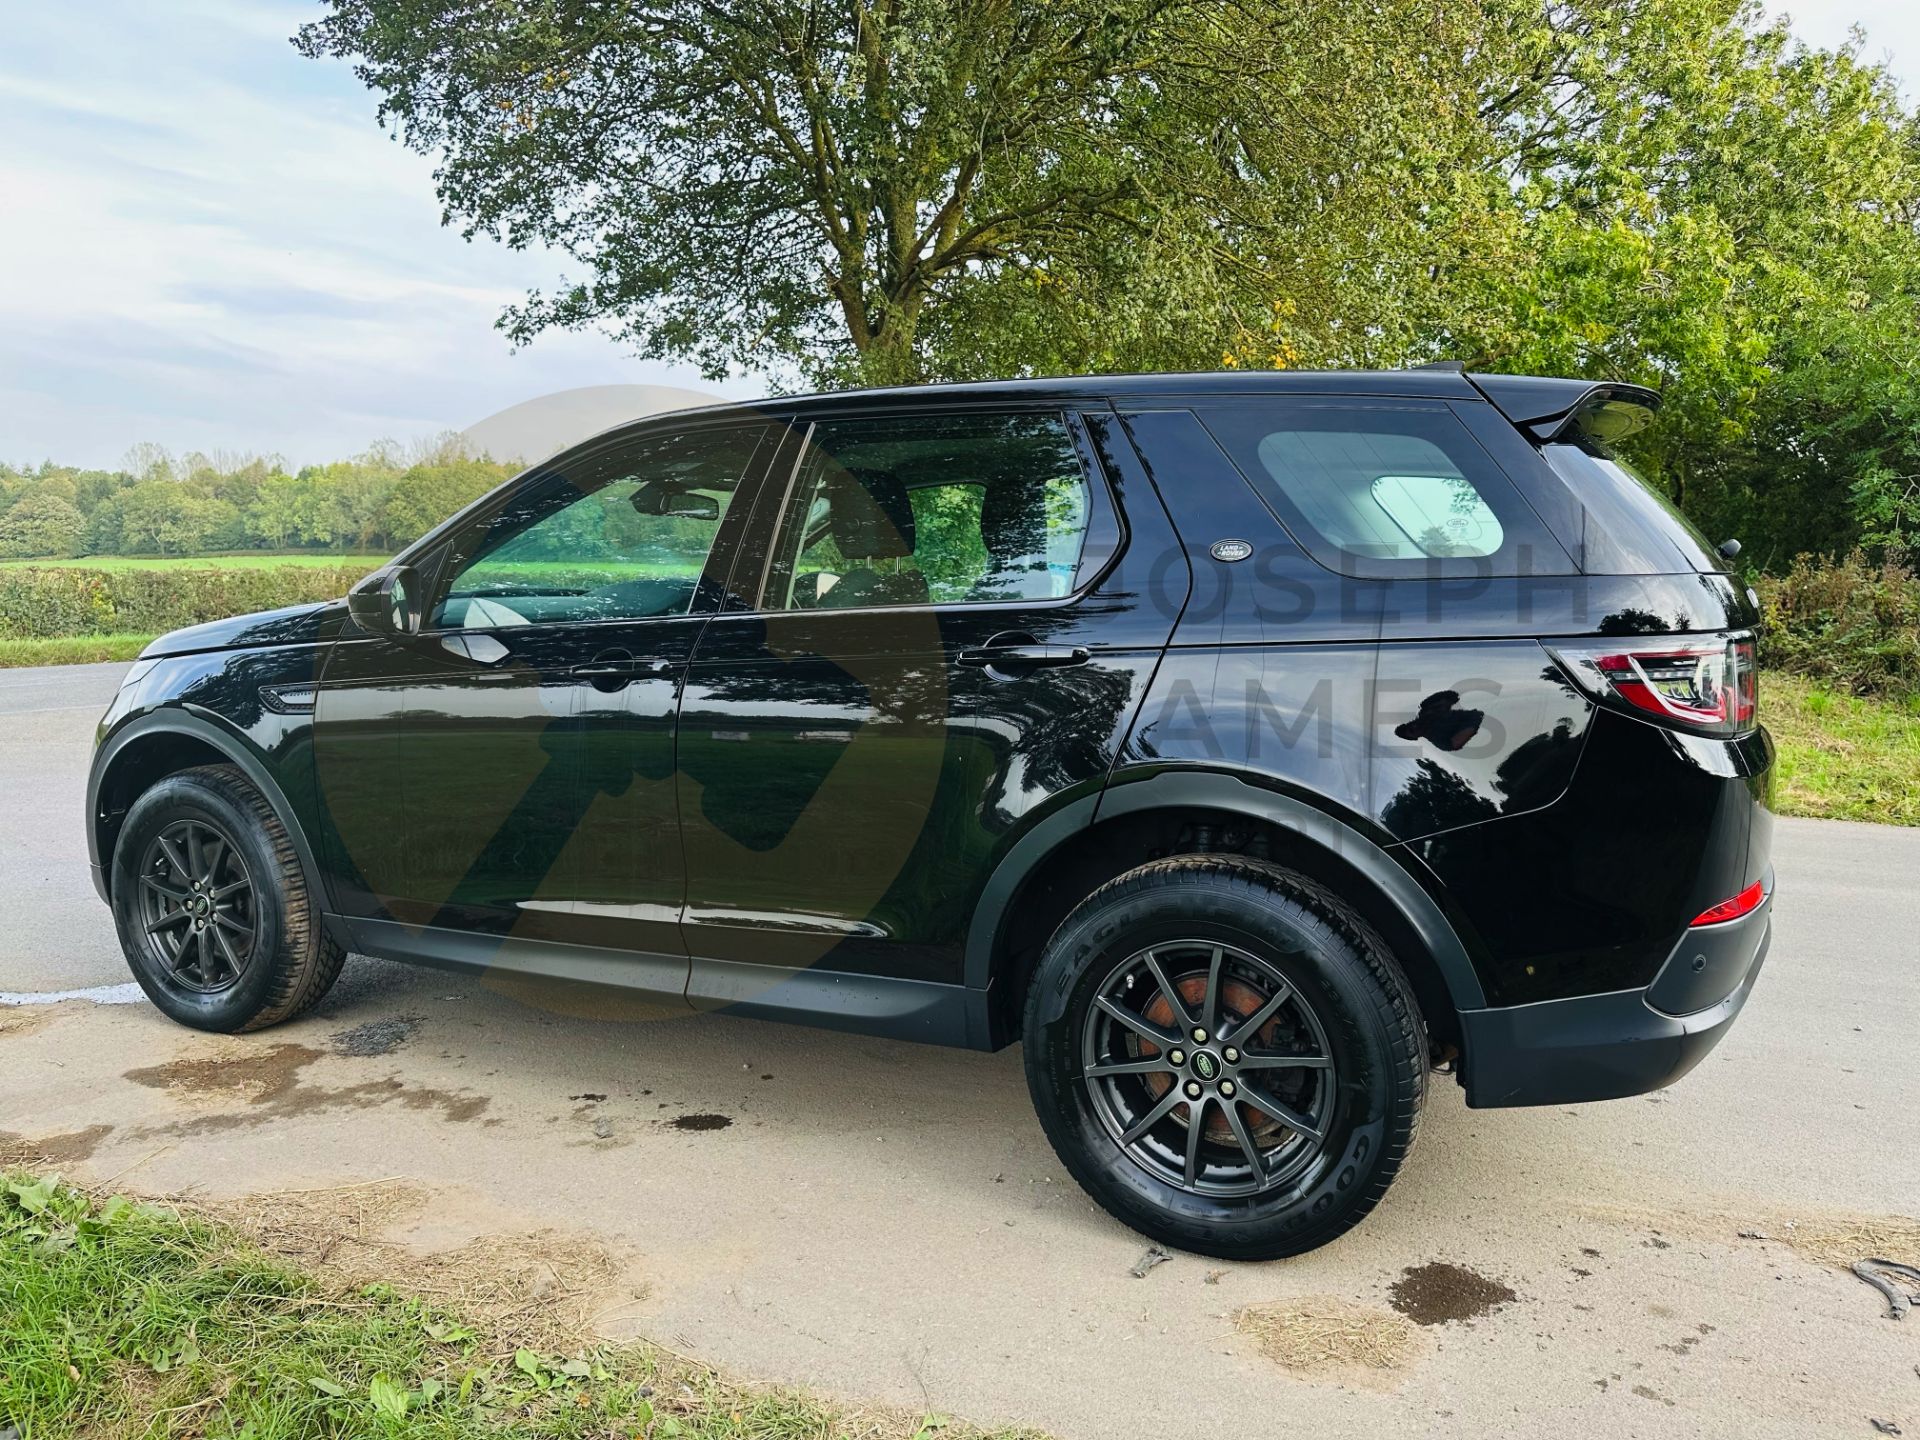 ON SALE LAND ROVER DISCOVERY SPORT (69 REG) - *2020 FACELIFT MODEL* - 1 OWNER FROM NEW - Image 9 of 39